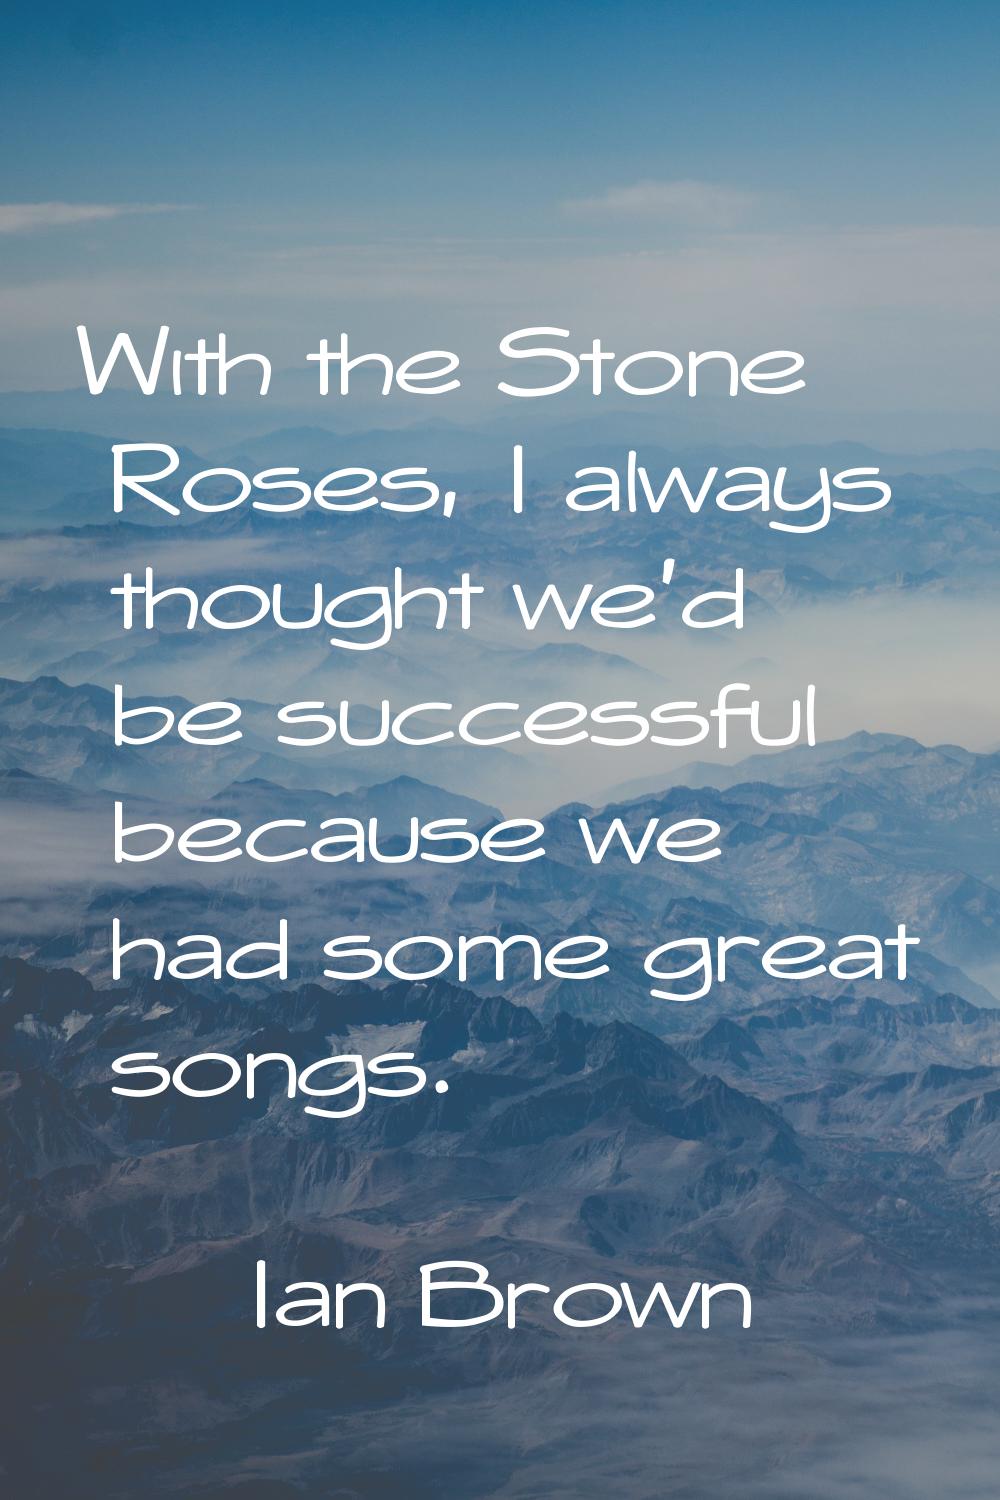 With the Stone Roses, I always thought we'd be successful because we had some great songs.